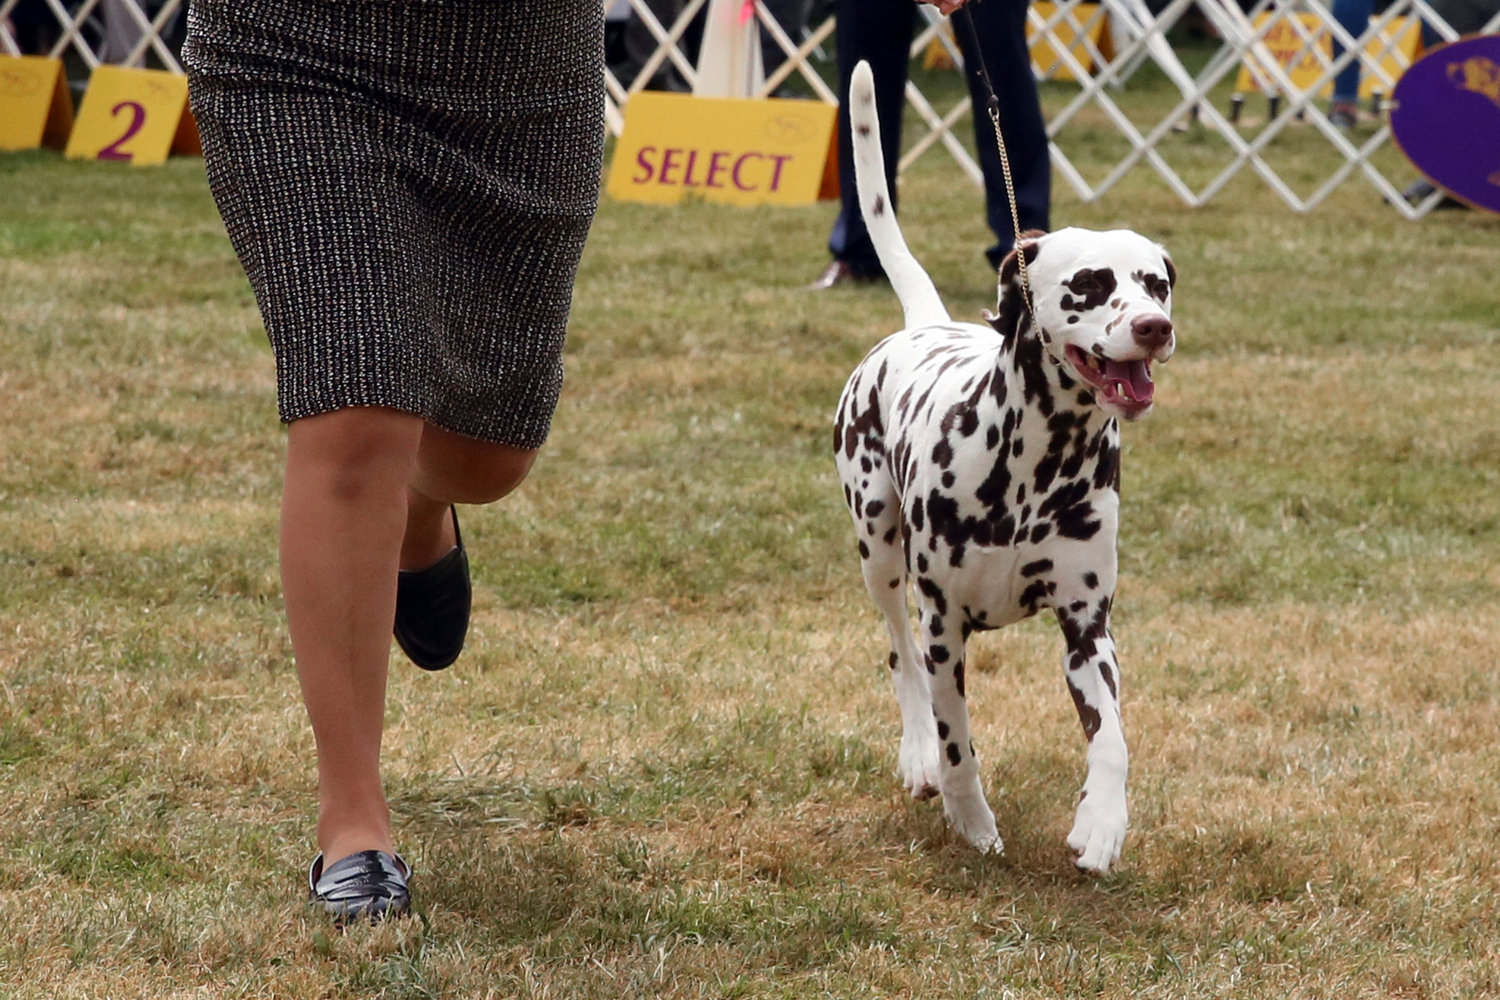 A Dalmatian competes at the Westminster Kennel Club Dog Show on Tuesday in Tarrytown, N.Y.